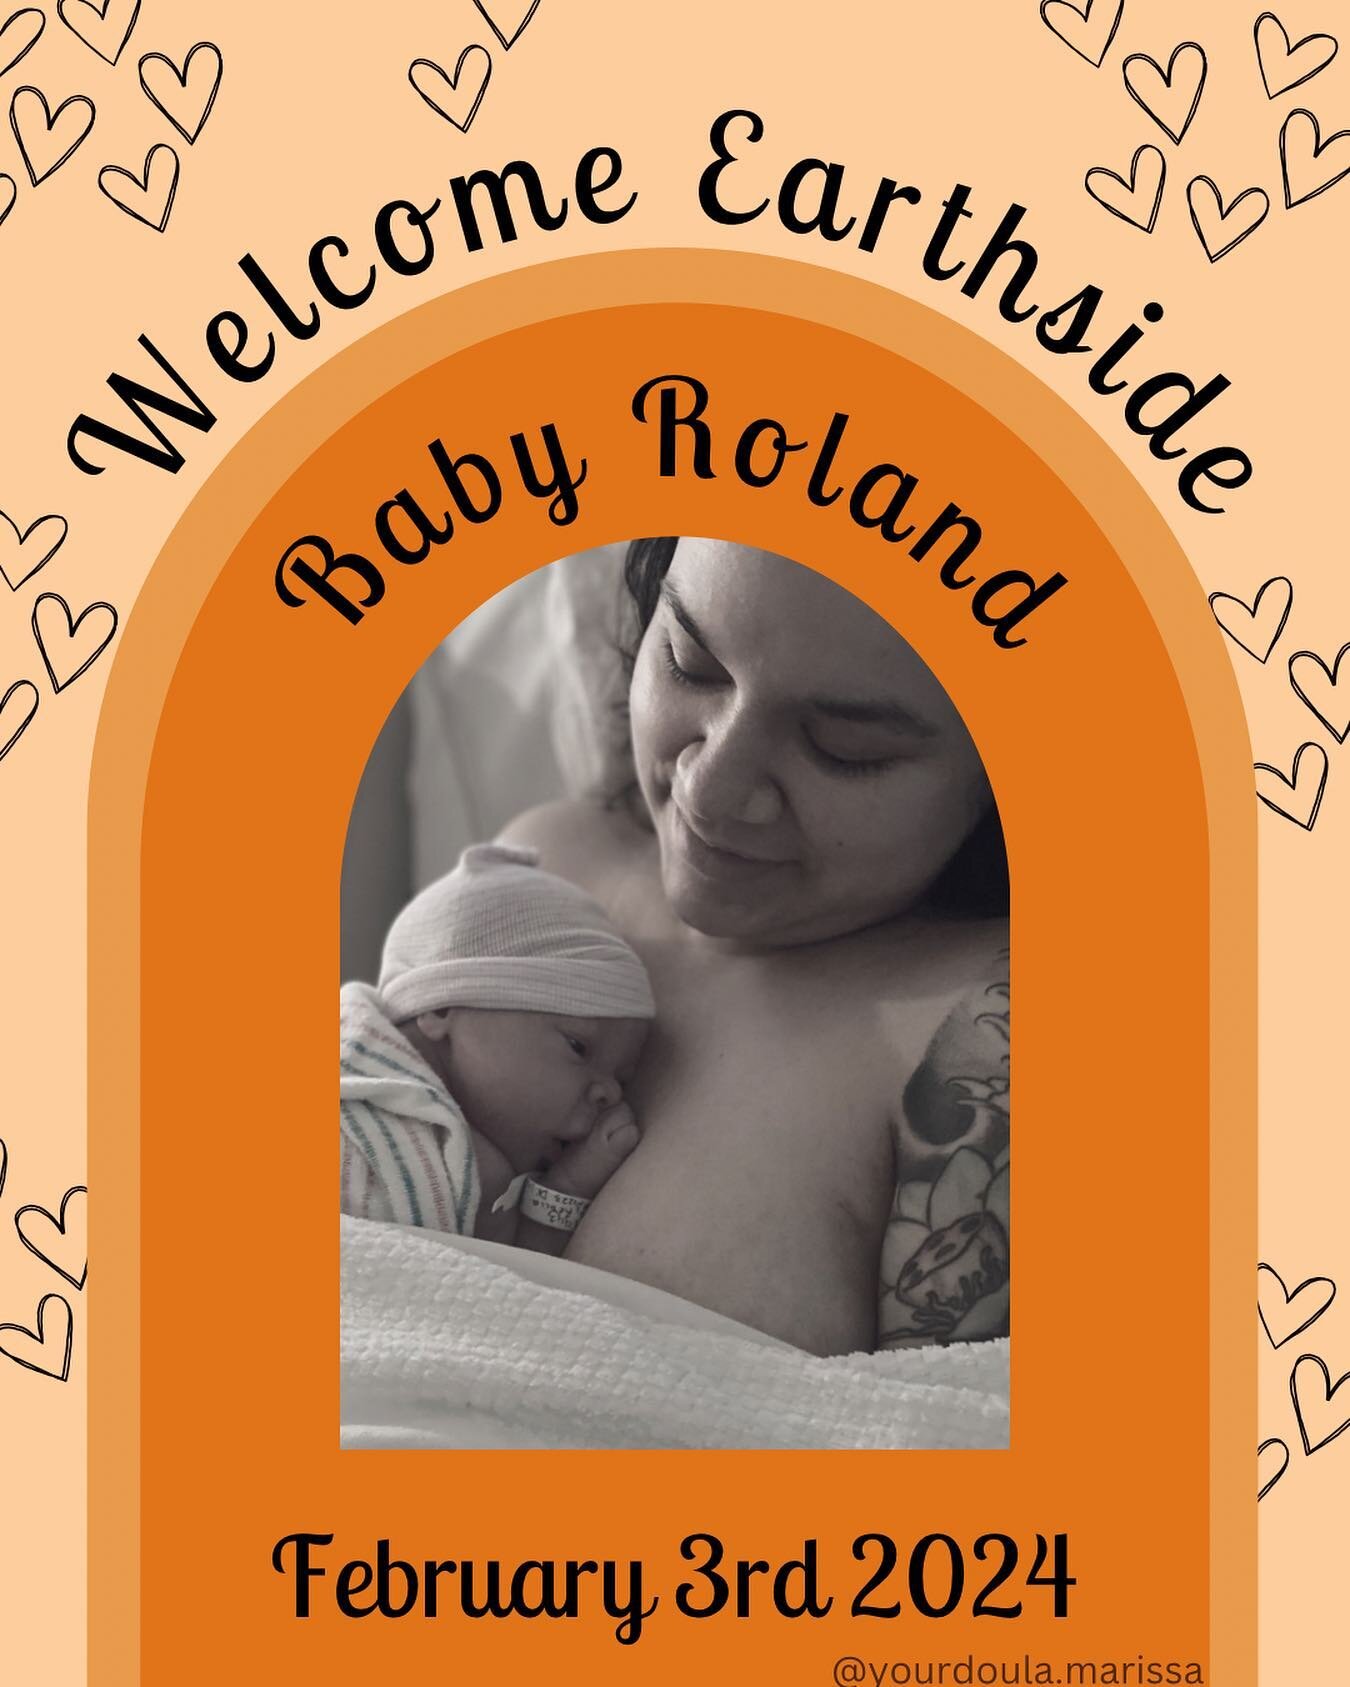 First birth of 2024! I&rsquo;m so grateful and honored to be welcomed into the birth space of this beautiful family. To witness the power of bringing life into this world is something magical ✨ 
Welcome baby Roland, you are so loved 🧡

&mdash;&mdash